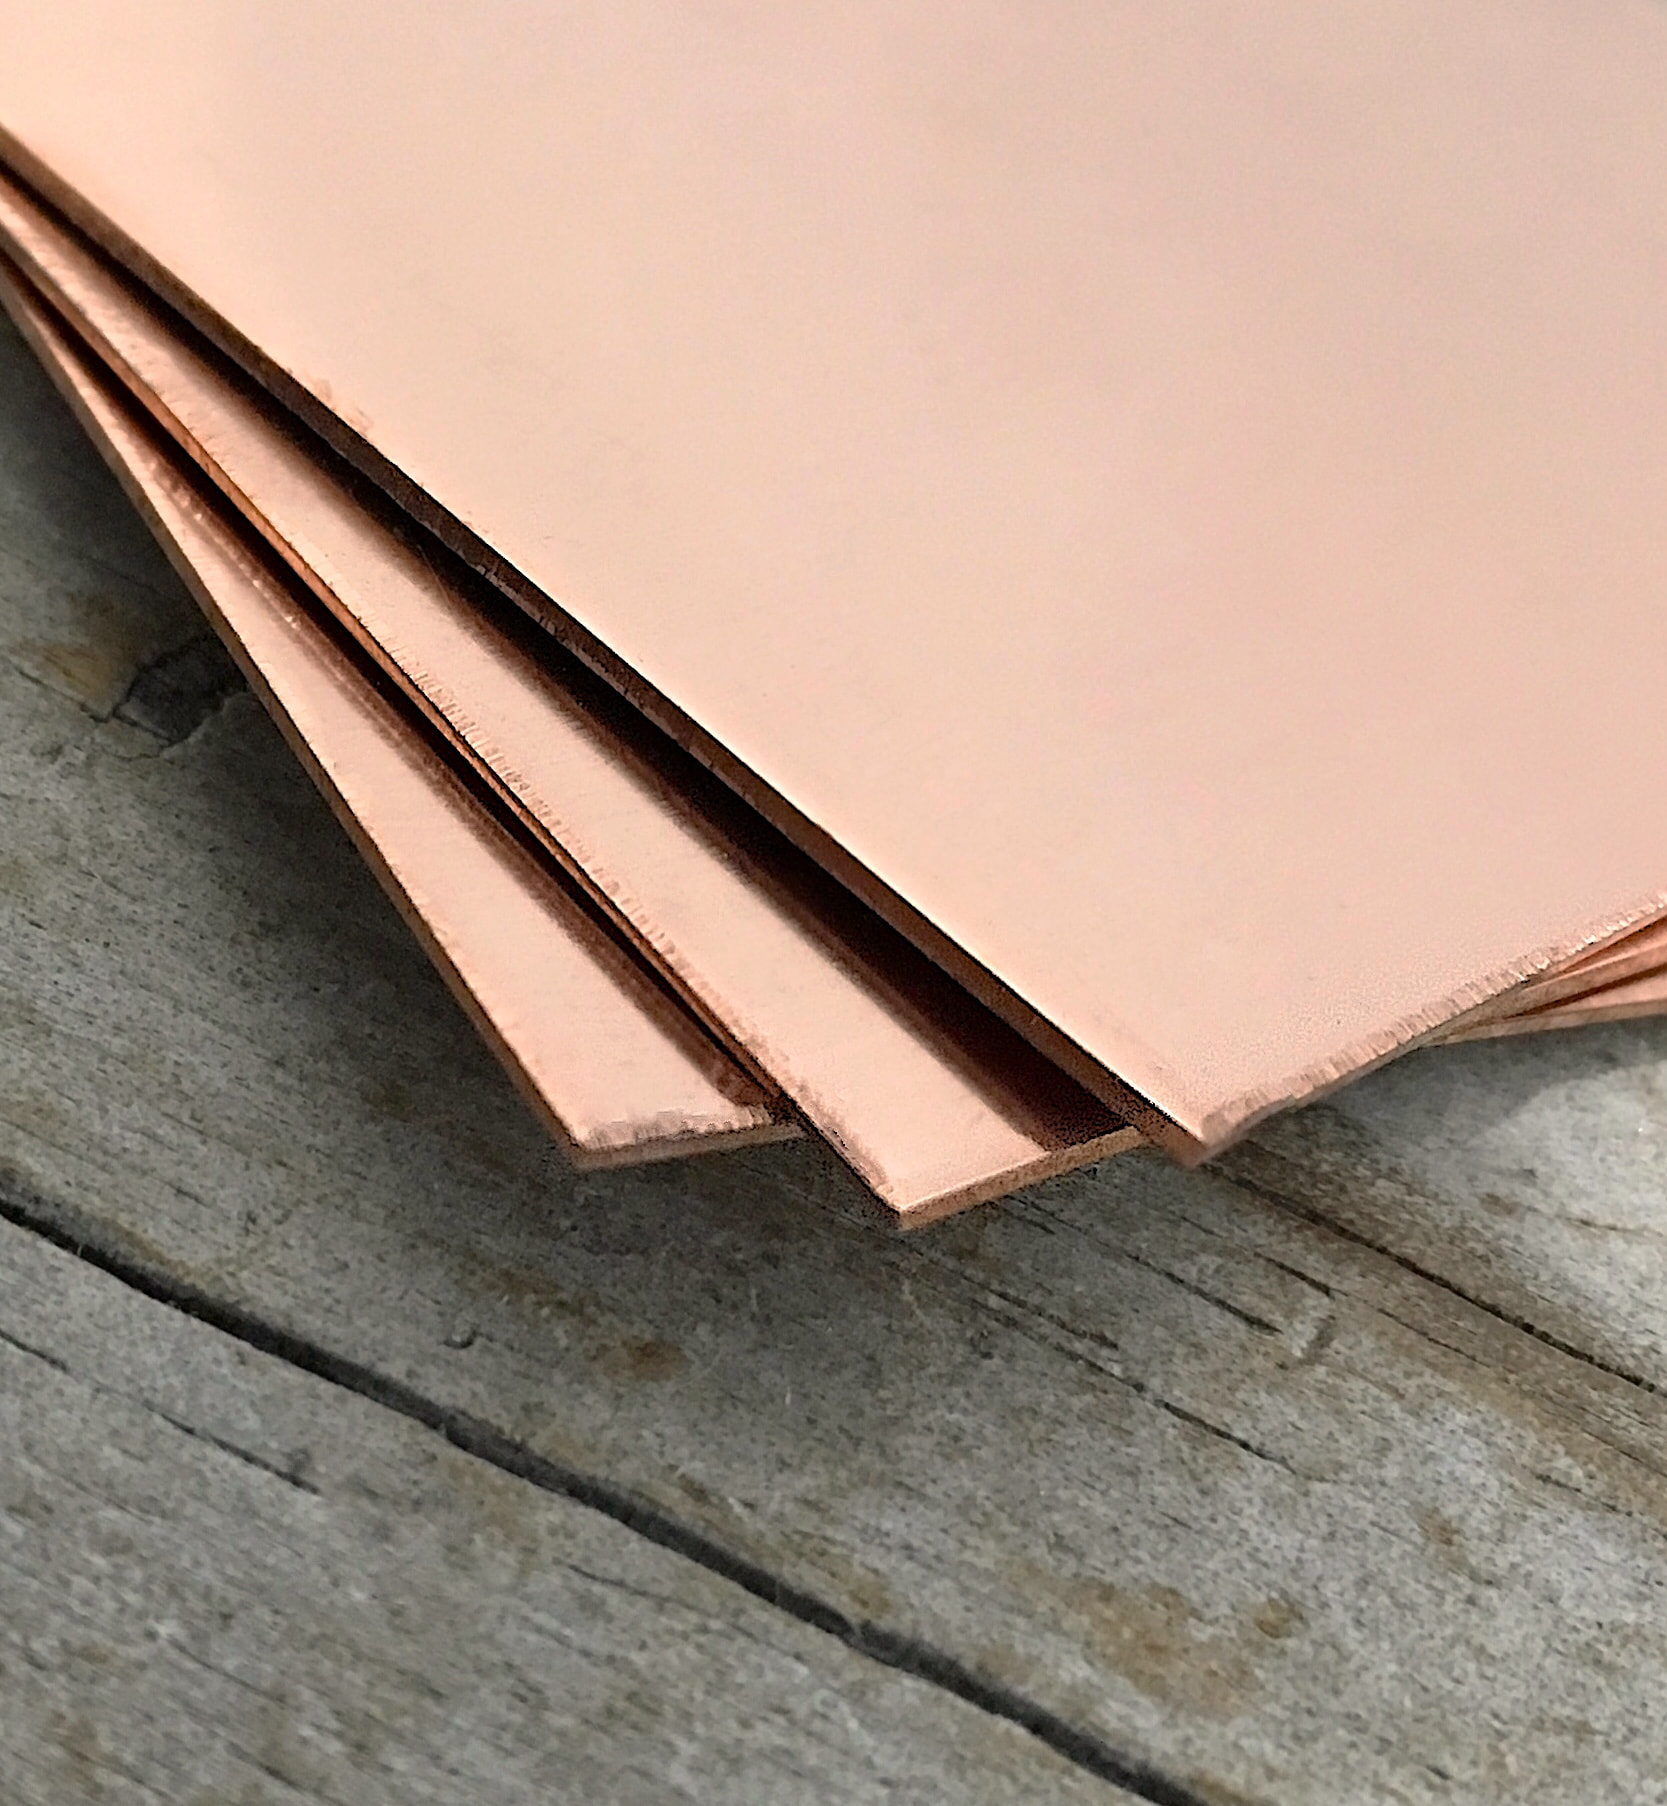 Copper Sheet 3 x 3 inches - Multiple gauges